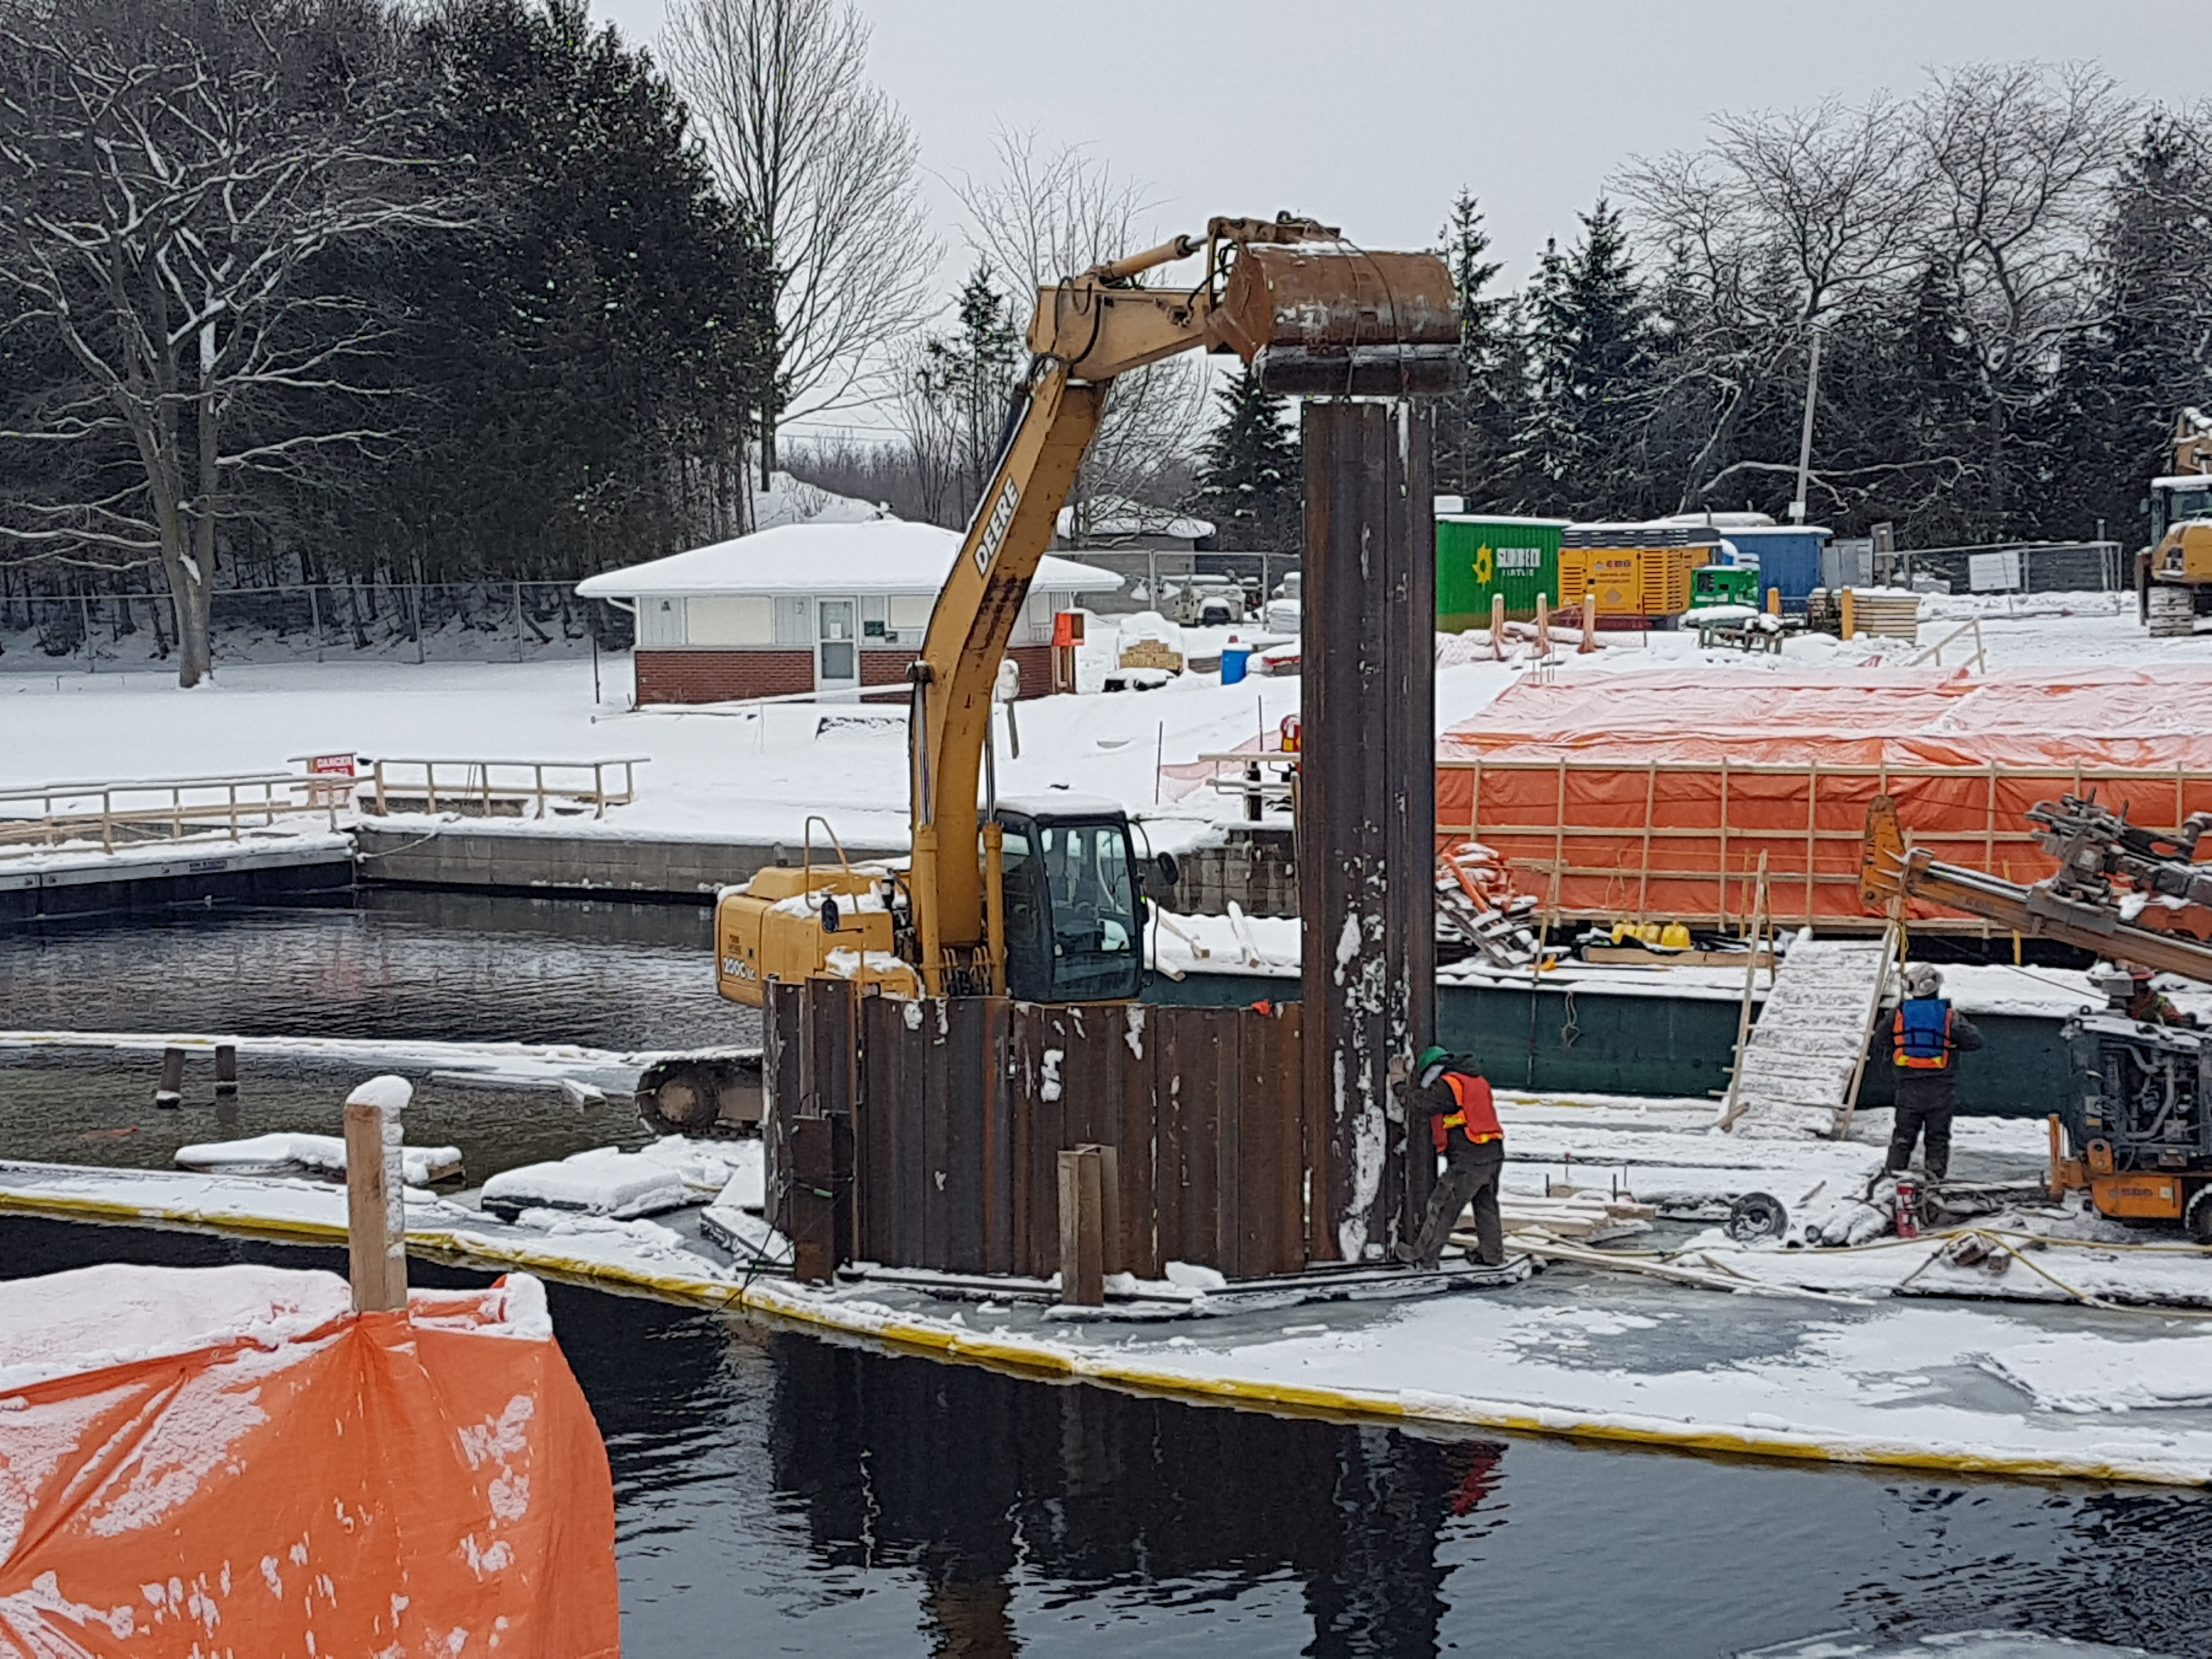 An excavator lifts forms into place at a snowy construction site.